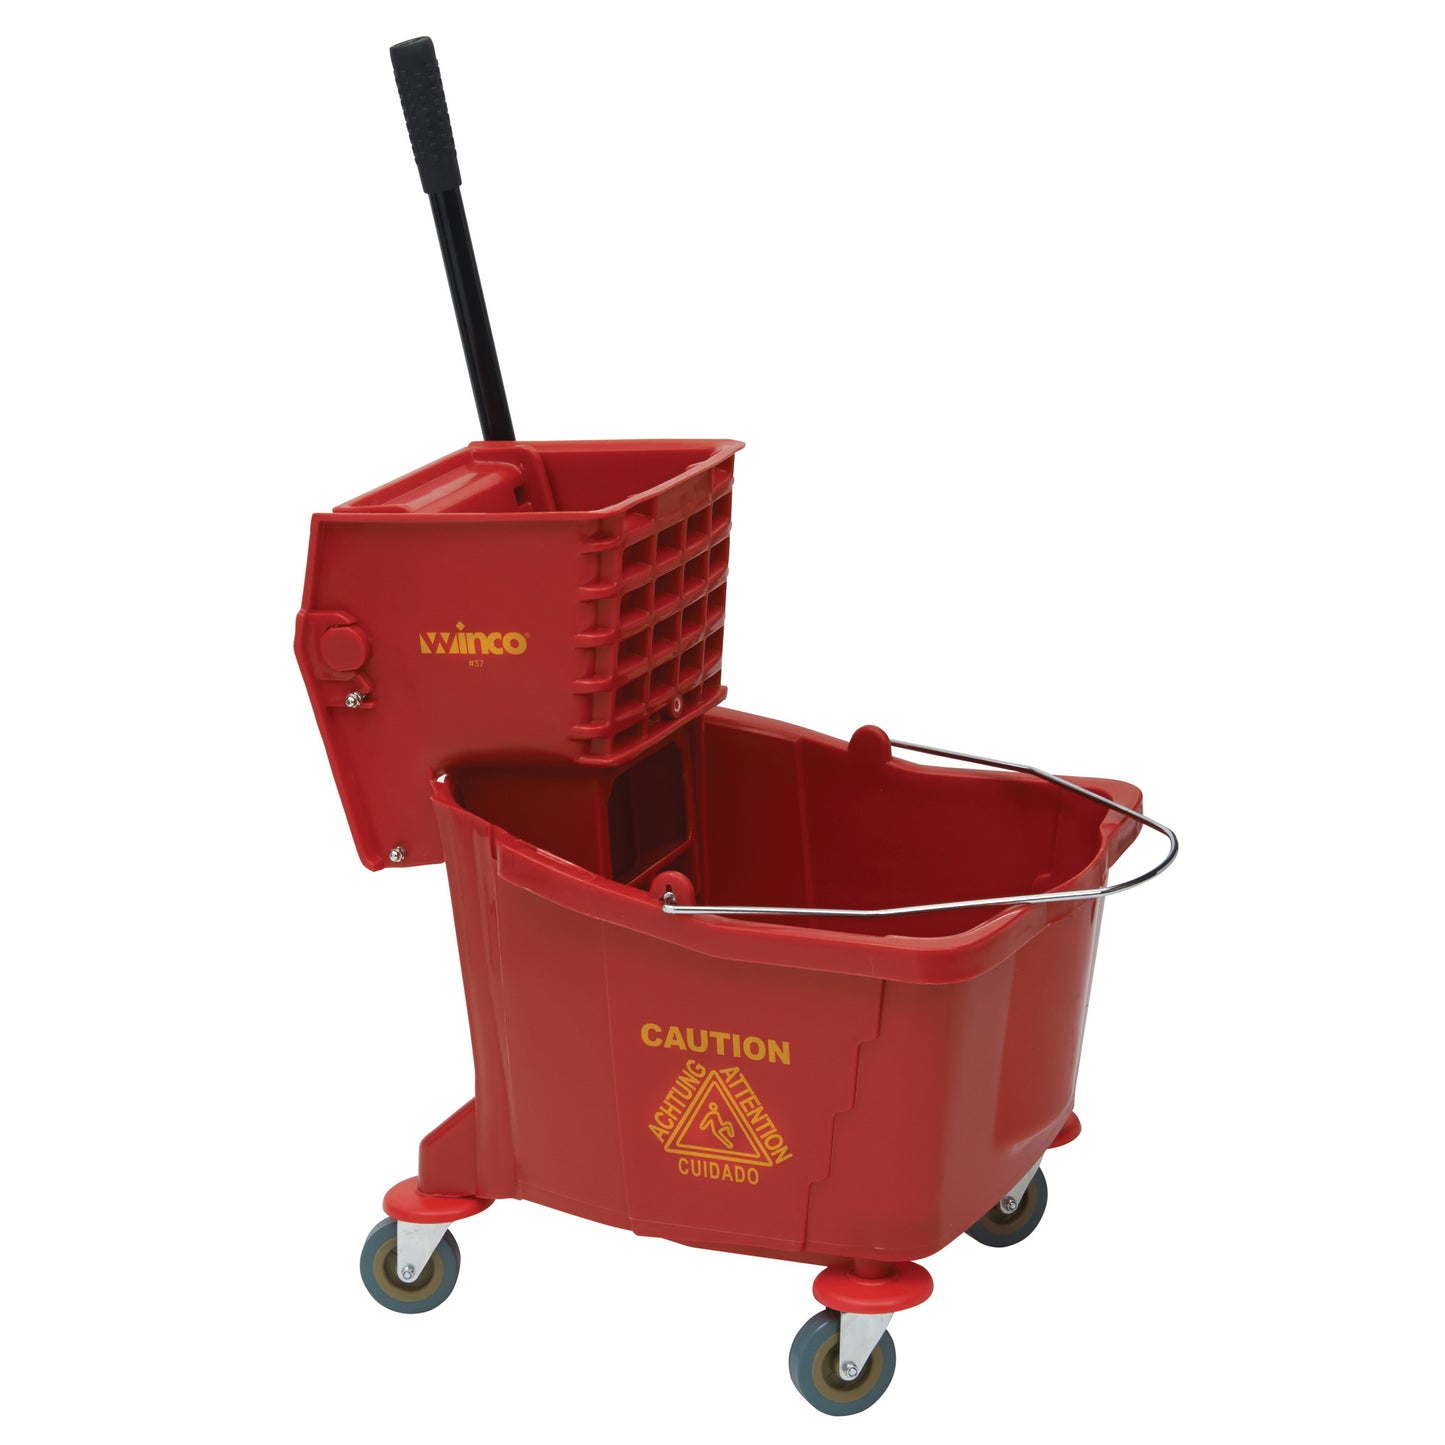 MPB-36R - 36 Quart Mop Bucket with Side-Press Wringer, Red